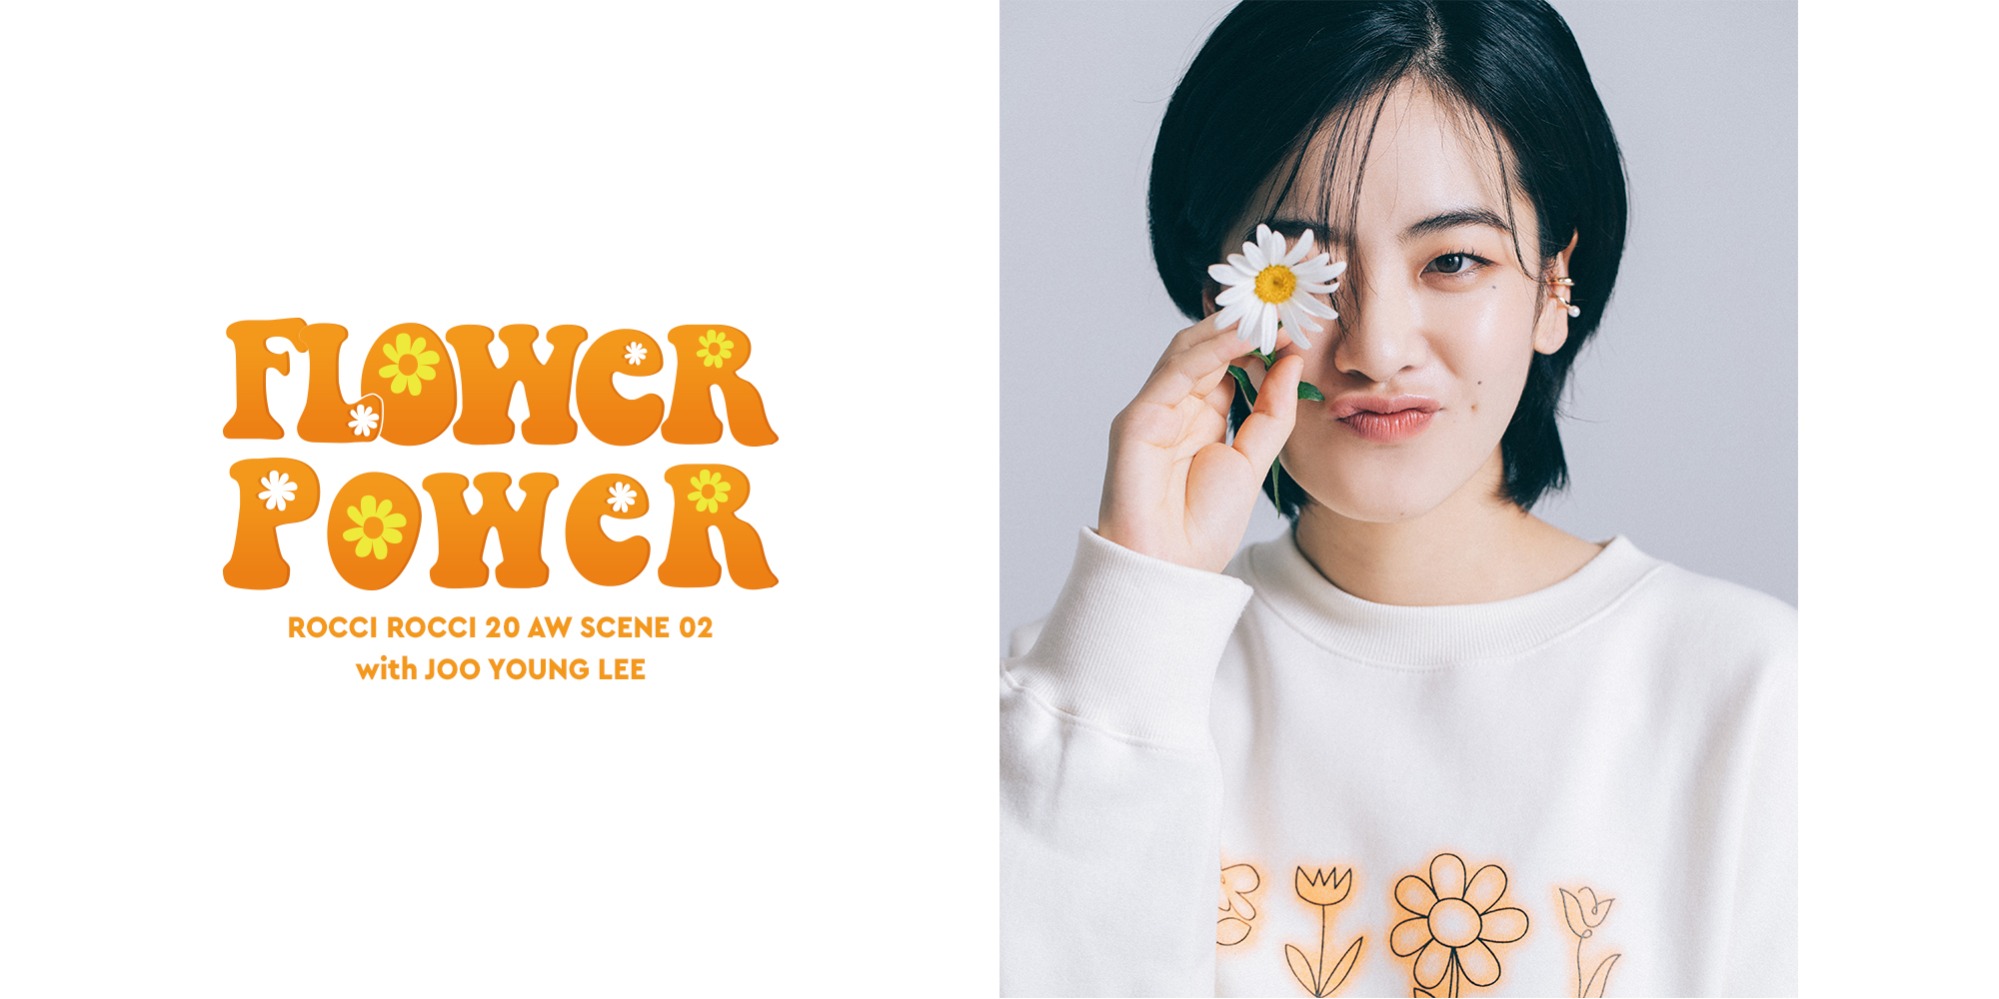 20 AW COLLECTION. FLOWER POWER #SCENE JOO YOUNG LEE20 AW COLLECTION. FLOWER POWER #SCENE JOO YOUNG LEE자체브랜드